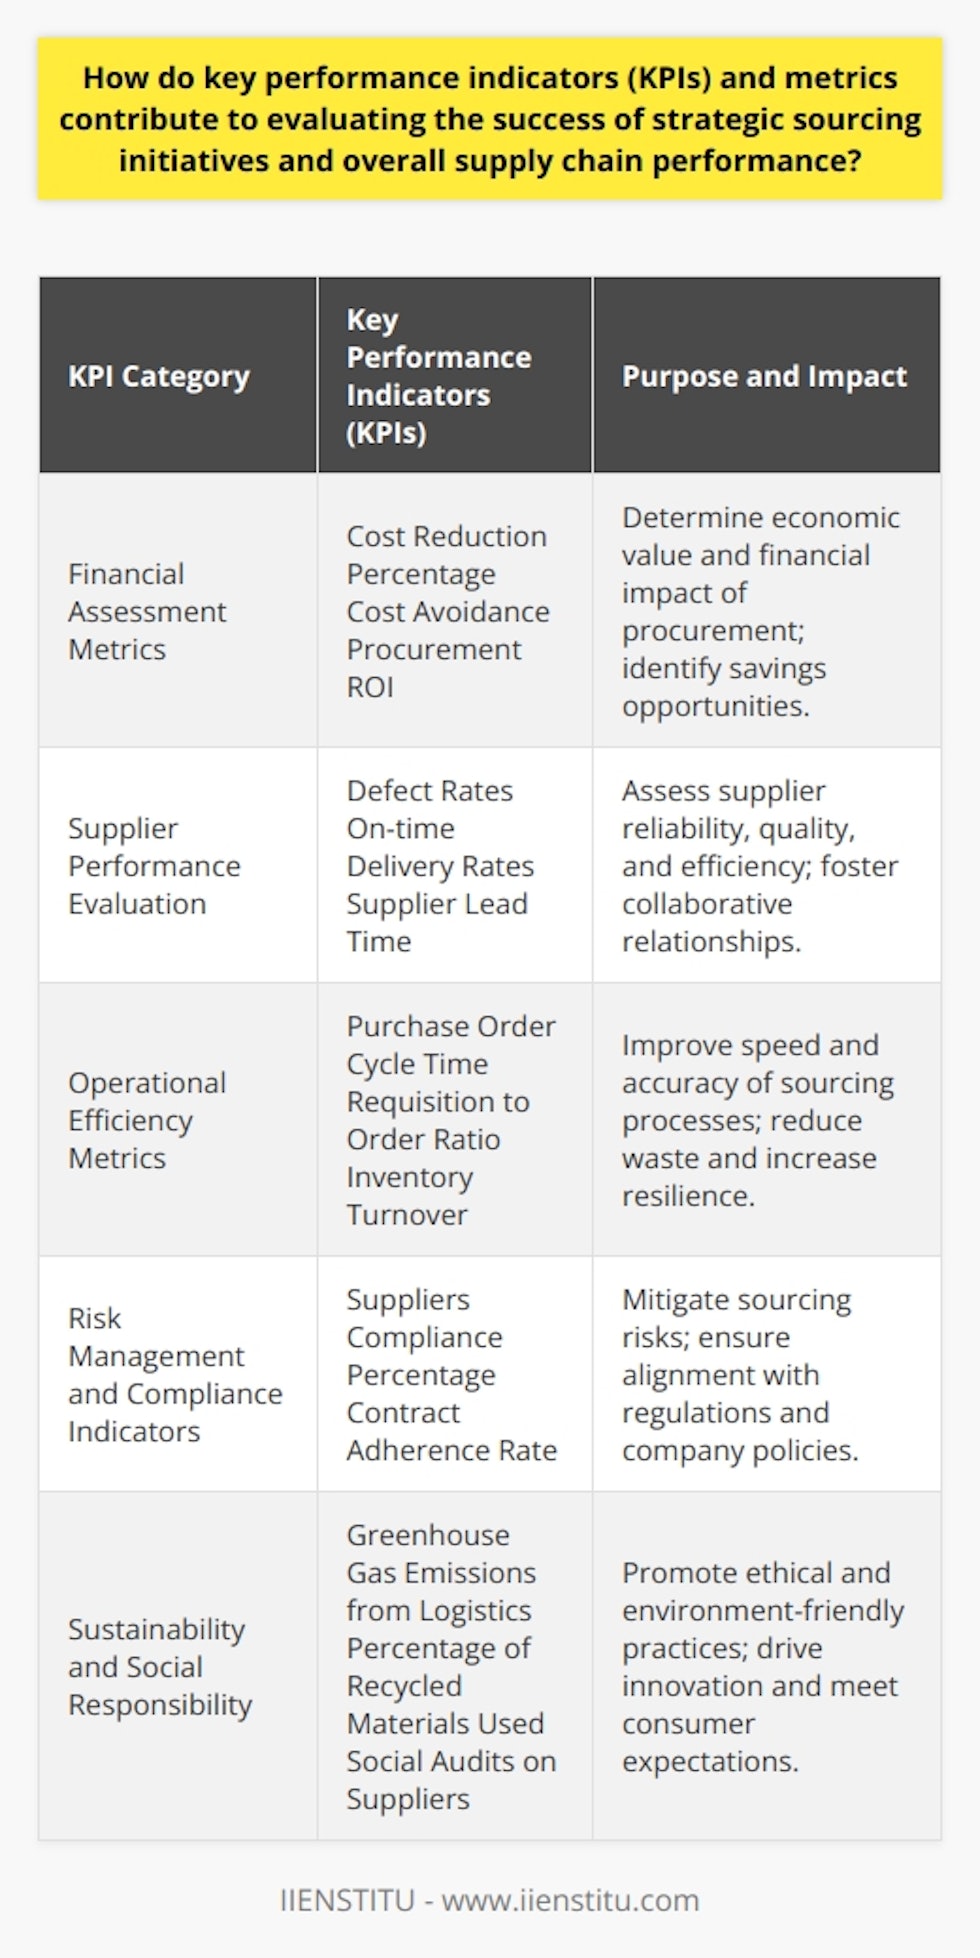 Key performance indicators (KPIs) and metrics are pivotal for evaluating strategic sourcing initiatives and overall supply chain performance. They provide a clear quantifiable framework for measuring the efficiency, effectiveness, and alignment of sourcing strategies with business objectives.Financial Assessment MetricsIn strategic sourcing, financial KPIs such as cost reduction percentage, cost avoidance, and procurement ROI are instrumental in determining the economic value derived from sourcing activities. These metrics assess the direct impact of procurement decisions on a company's financial health. By analyzing spend under management, procurement teams can identify critical areas where sourcing strategies have led to significant financial gains or highlight potential savings opportunities.Supplier Performance EvaluationThe success of supply chain operations largely depends on supplier performance. Therefore, measuring supplier-centric KPIs like defect rates, on-time delivery rates, and the supplier lead time is crucial. These indicators help procurement professionals evaluate the reliability, quality, and efficiency of their suppliers. Organizations often institute supplier scorecards to track these KPIs, driving improvements through regular reviews and fostering healthy, collaborative relationships with their vendor base.Operational Efficiency MetricsEfficiency KPIs are essential in streamlining and improving procurement operations. Metrics such as purchase order cycle time, requisition to order ratio, and inventory turnover provide insights into the speed and accuracy of sourcing processes. Continuous monitoring and optimization of these KPIs ensure that procurement activities are lean, reduce waste, and are resilient to market fluctuations.Risk Management and Compliance IndicatorsRisk and compliance metrics, such as the percentage of suppliers compliant with regulatory and policy requirements or the rate of contract adherence, play a critical role in mitigating the risks associated with strategic sourcing. These KPIs help identify potential legal and ethical issues early on and ensure that procurement activities align with industry standards, regulations, and company policies.Sustainability and Social ResponsibilityThe rise of eco-conscious consumerism and social responsibility requires organizations to adopt sustainability KPIs within their strategic sourcing framework. KPIs like greenhouse gas emissions from logistics, percentage of recycled materials used, and social audits conducted on suppliers underscore a company's commitment to ethical and environmentally friendly sourcing practices. These sustainability metrics not only demonstrate corporate responsibility but also can drive innovations in product development and sourcing that resonate with socially conscious consumers.In leveraging these KPIs, organizations are advised to tailor their metrics in accordance with their specific strategic objectives, industry standards, and unique operational challenges. By doing so, they can craft a nuanced approach to strategic sourcing capable of delivering tangible value and fostering sustainable growth within the supply chain landscape.